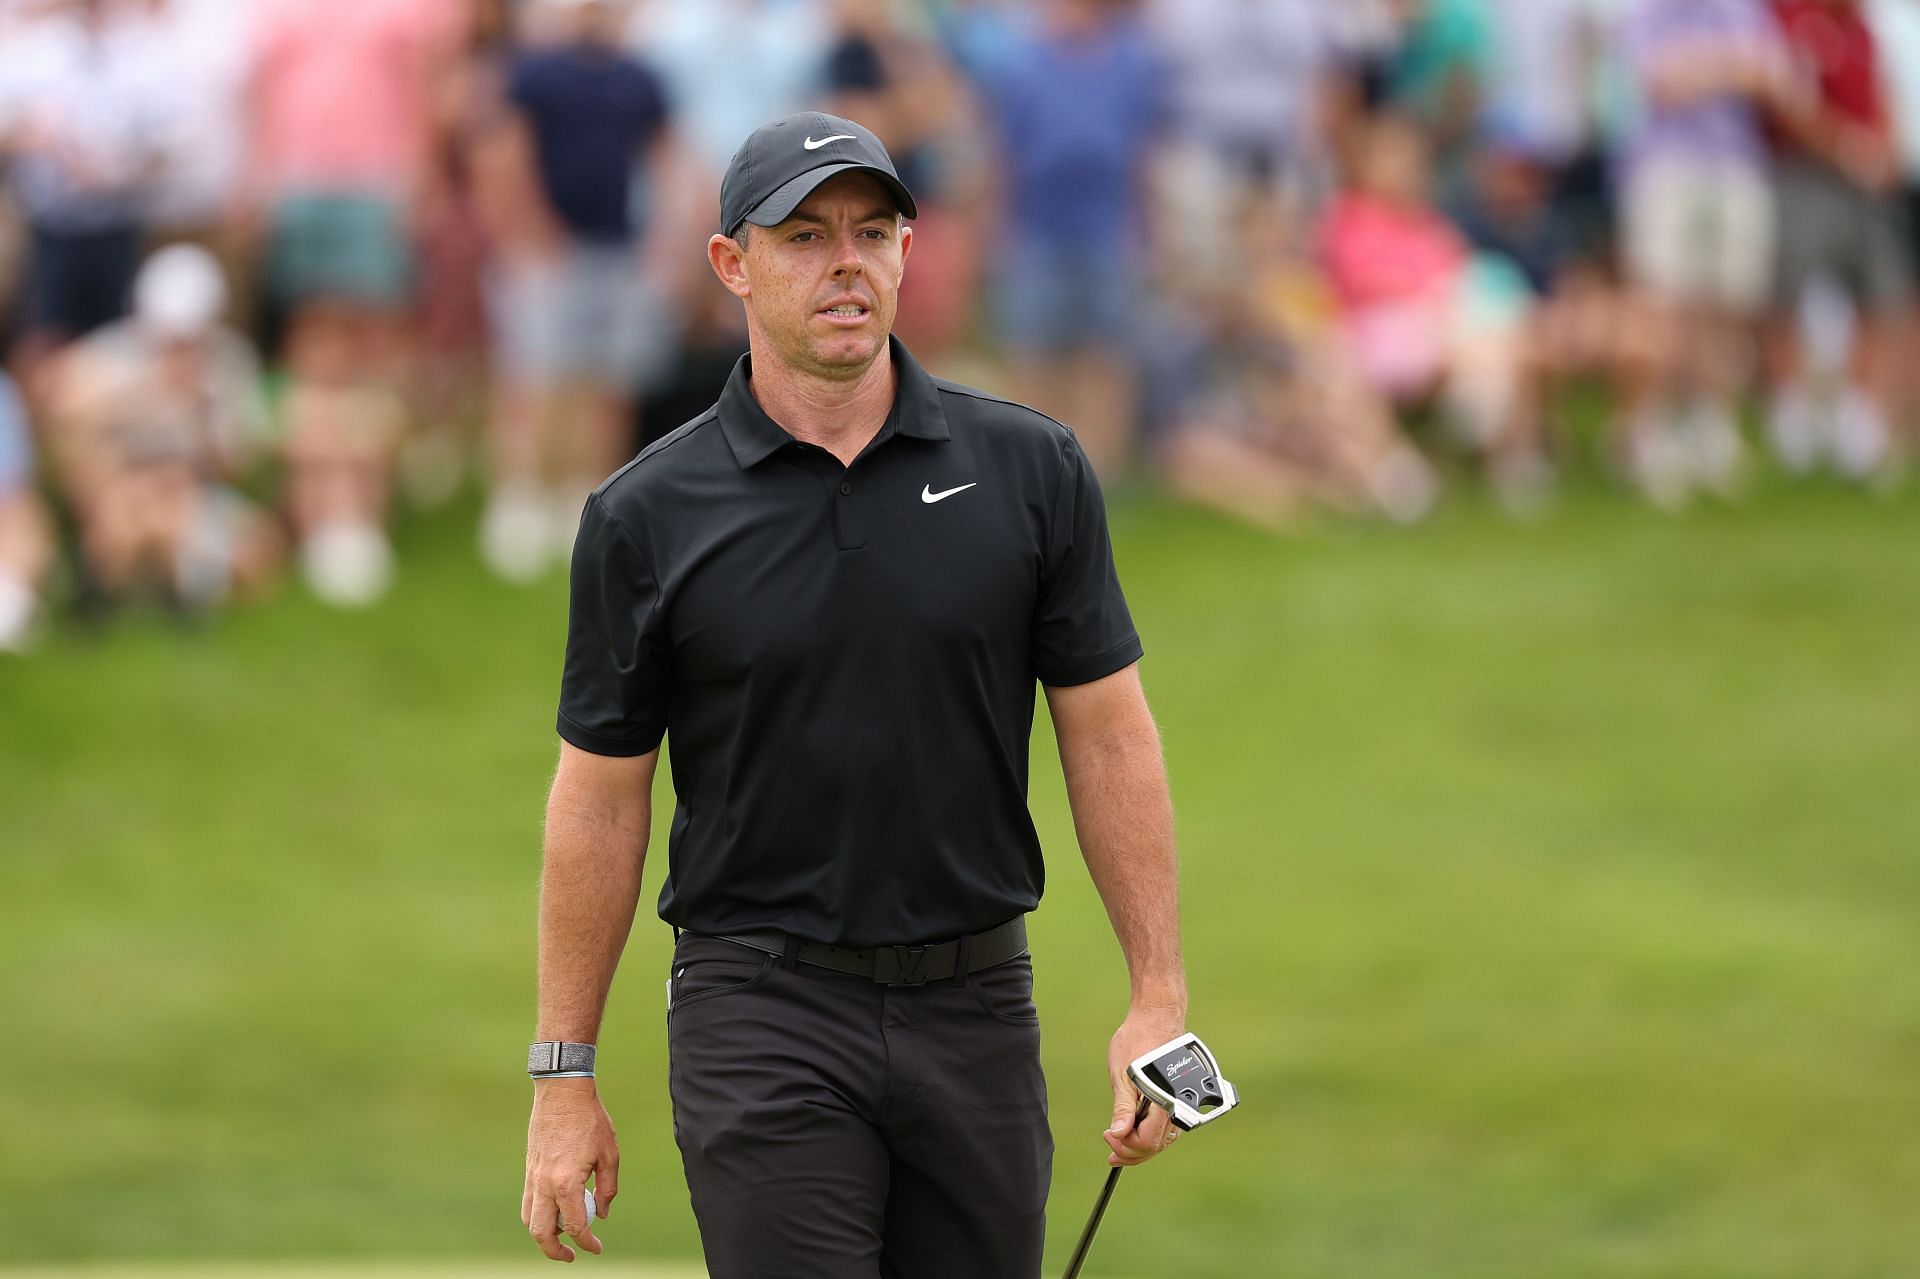 Rory McIlroy playing at the 2023 Travelers Championship - Round Two (Image via Getty)